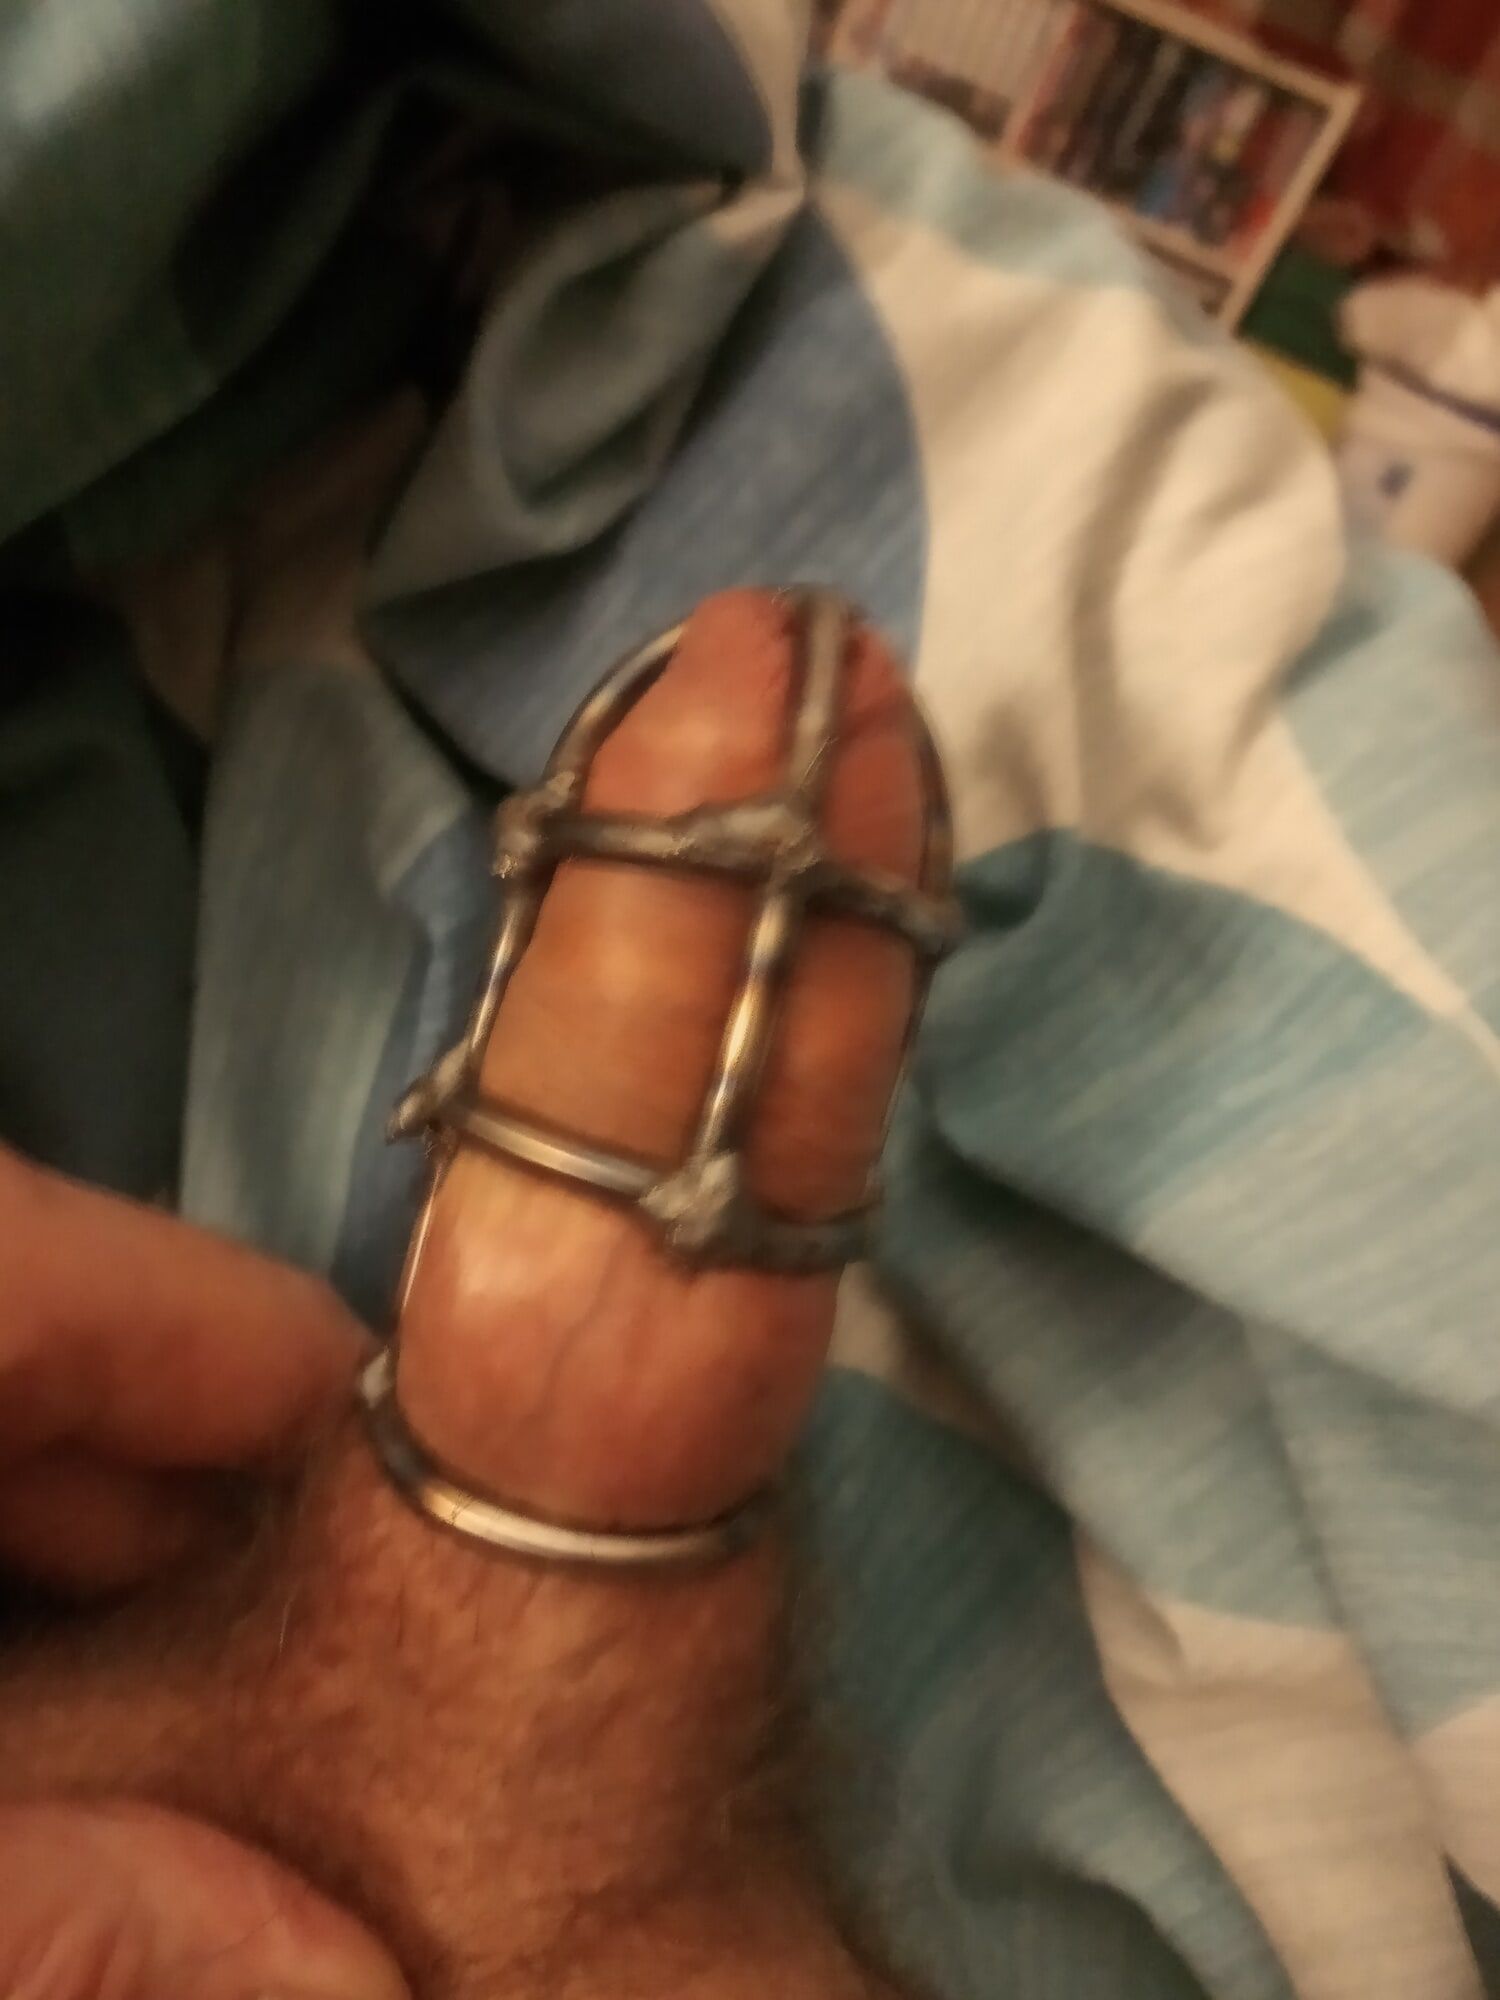 Cock cage #3